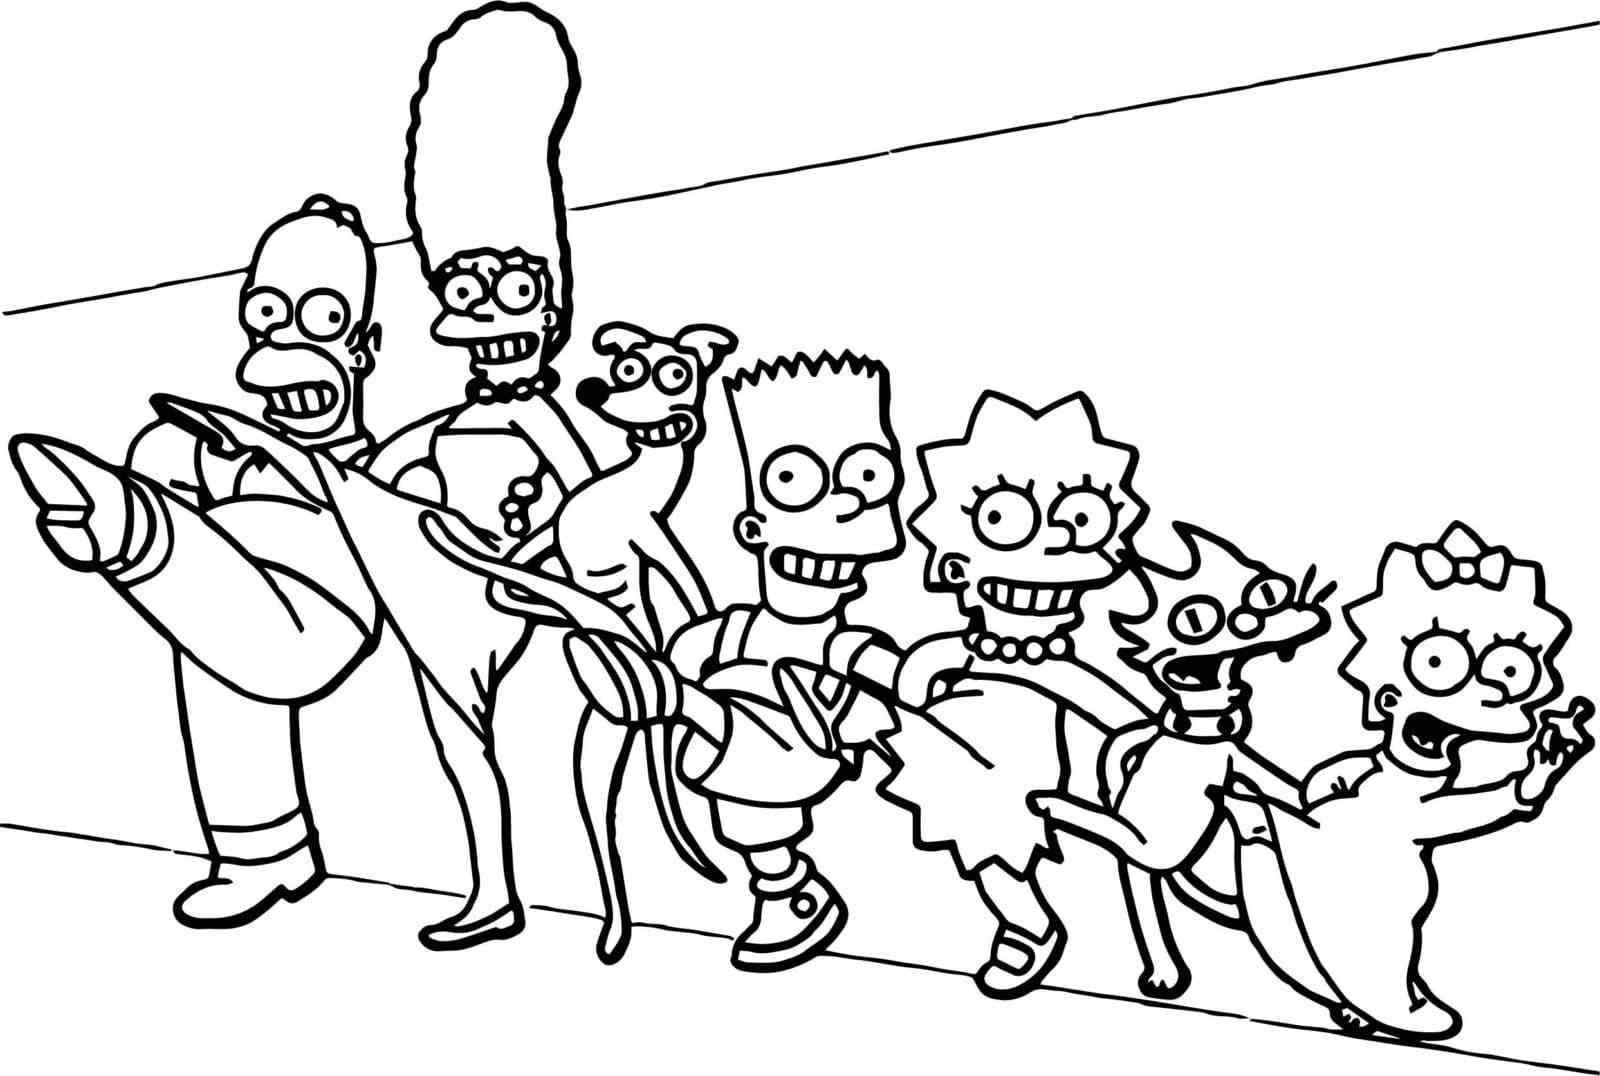 The Dancing Simpsons Family Coloring Page